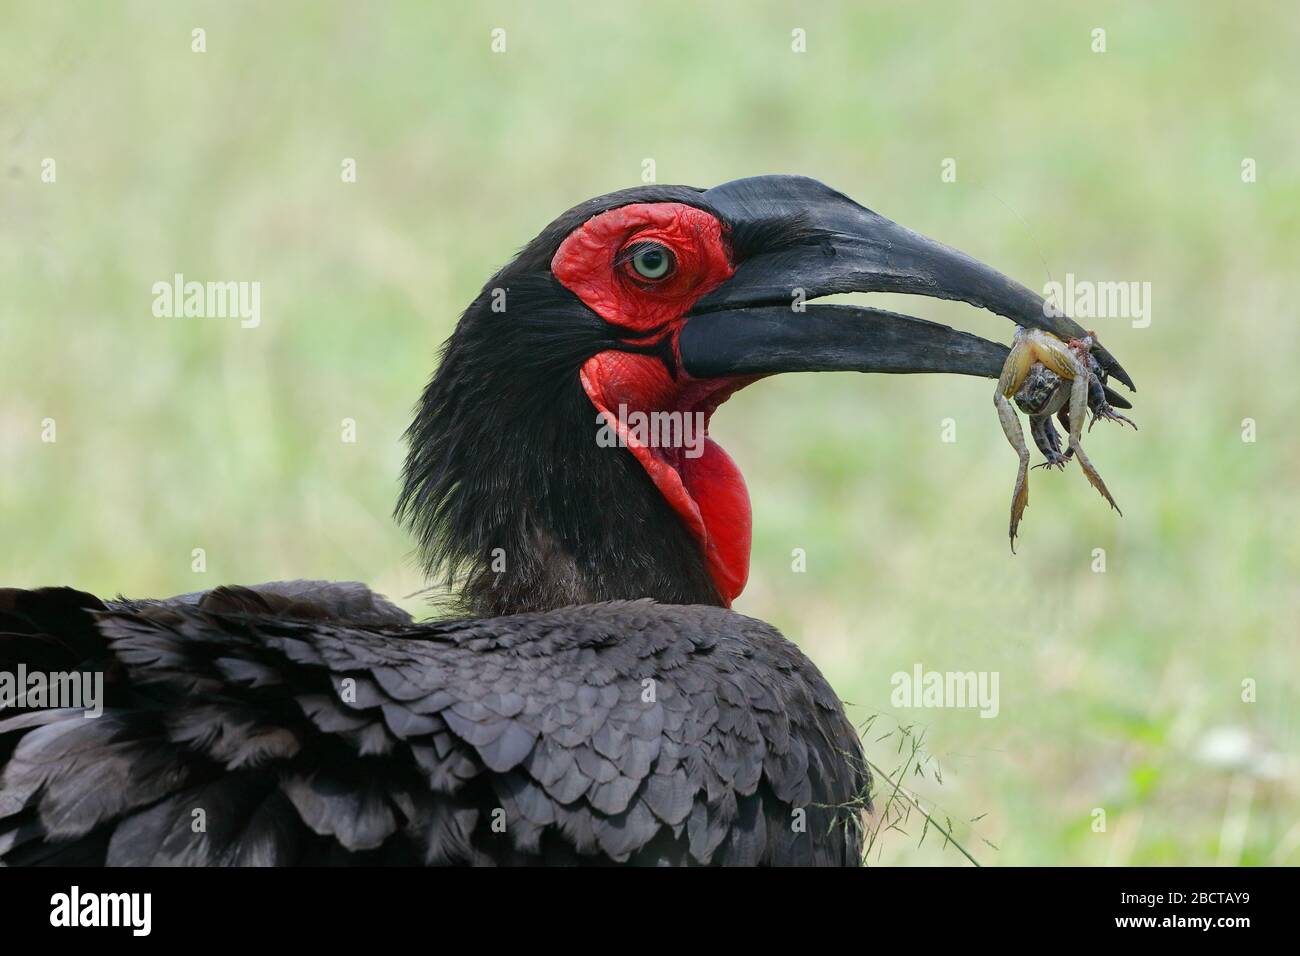 The southern ground hornbill, is one of two species of ground hornbill, which are both found solely within Africa, is the largest species of hornbill. Stock Photo